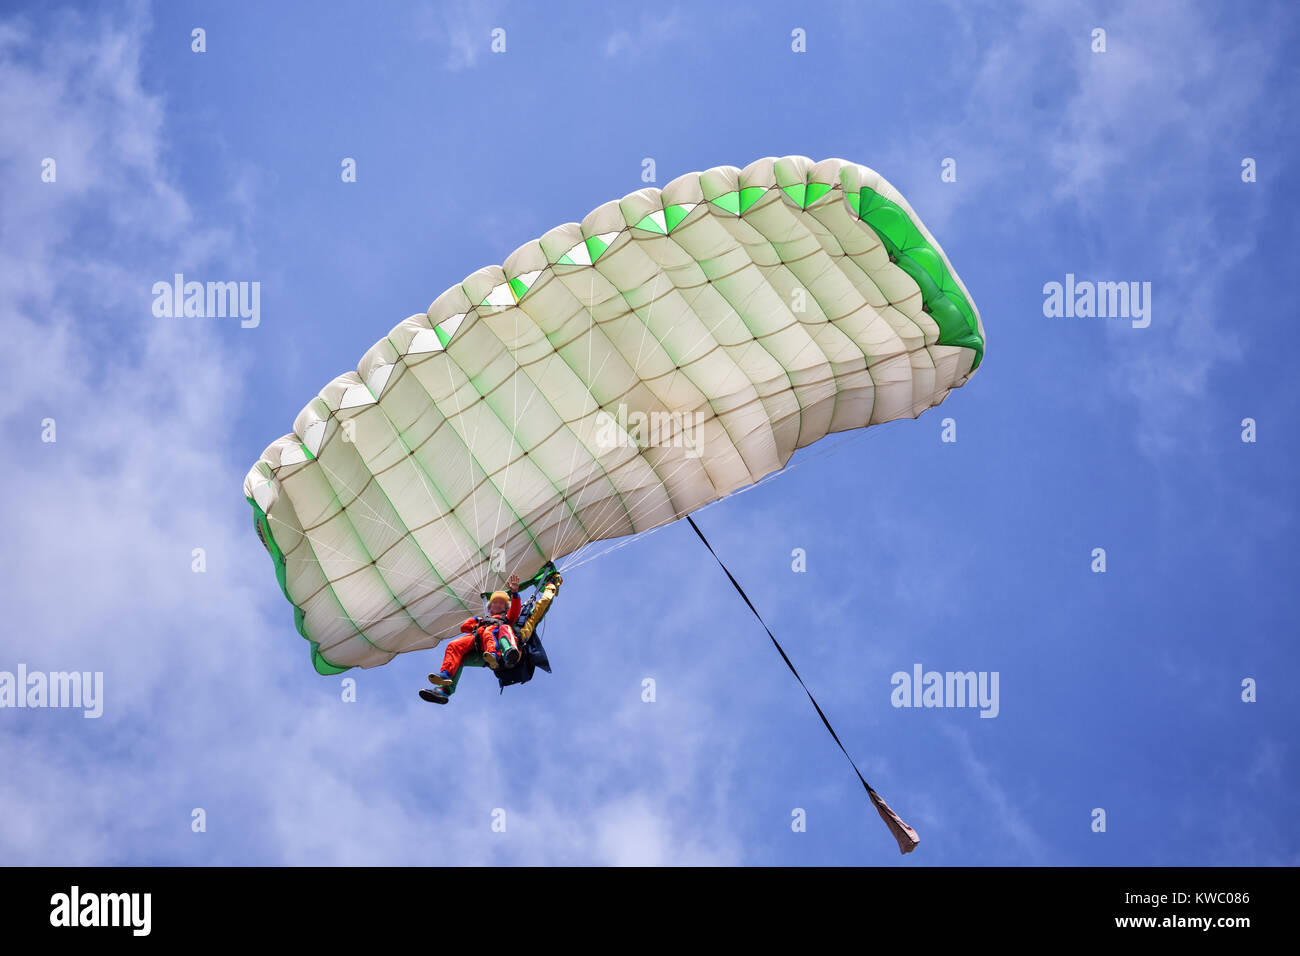 Extreme active parapendio flyng oltre Foto Stock